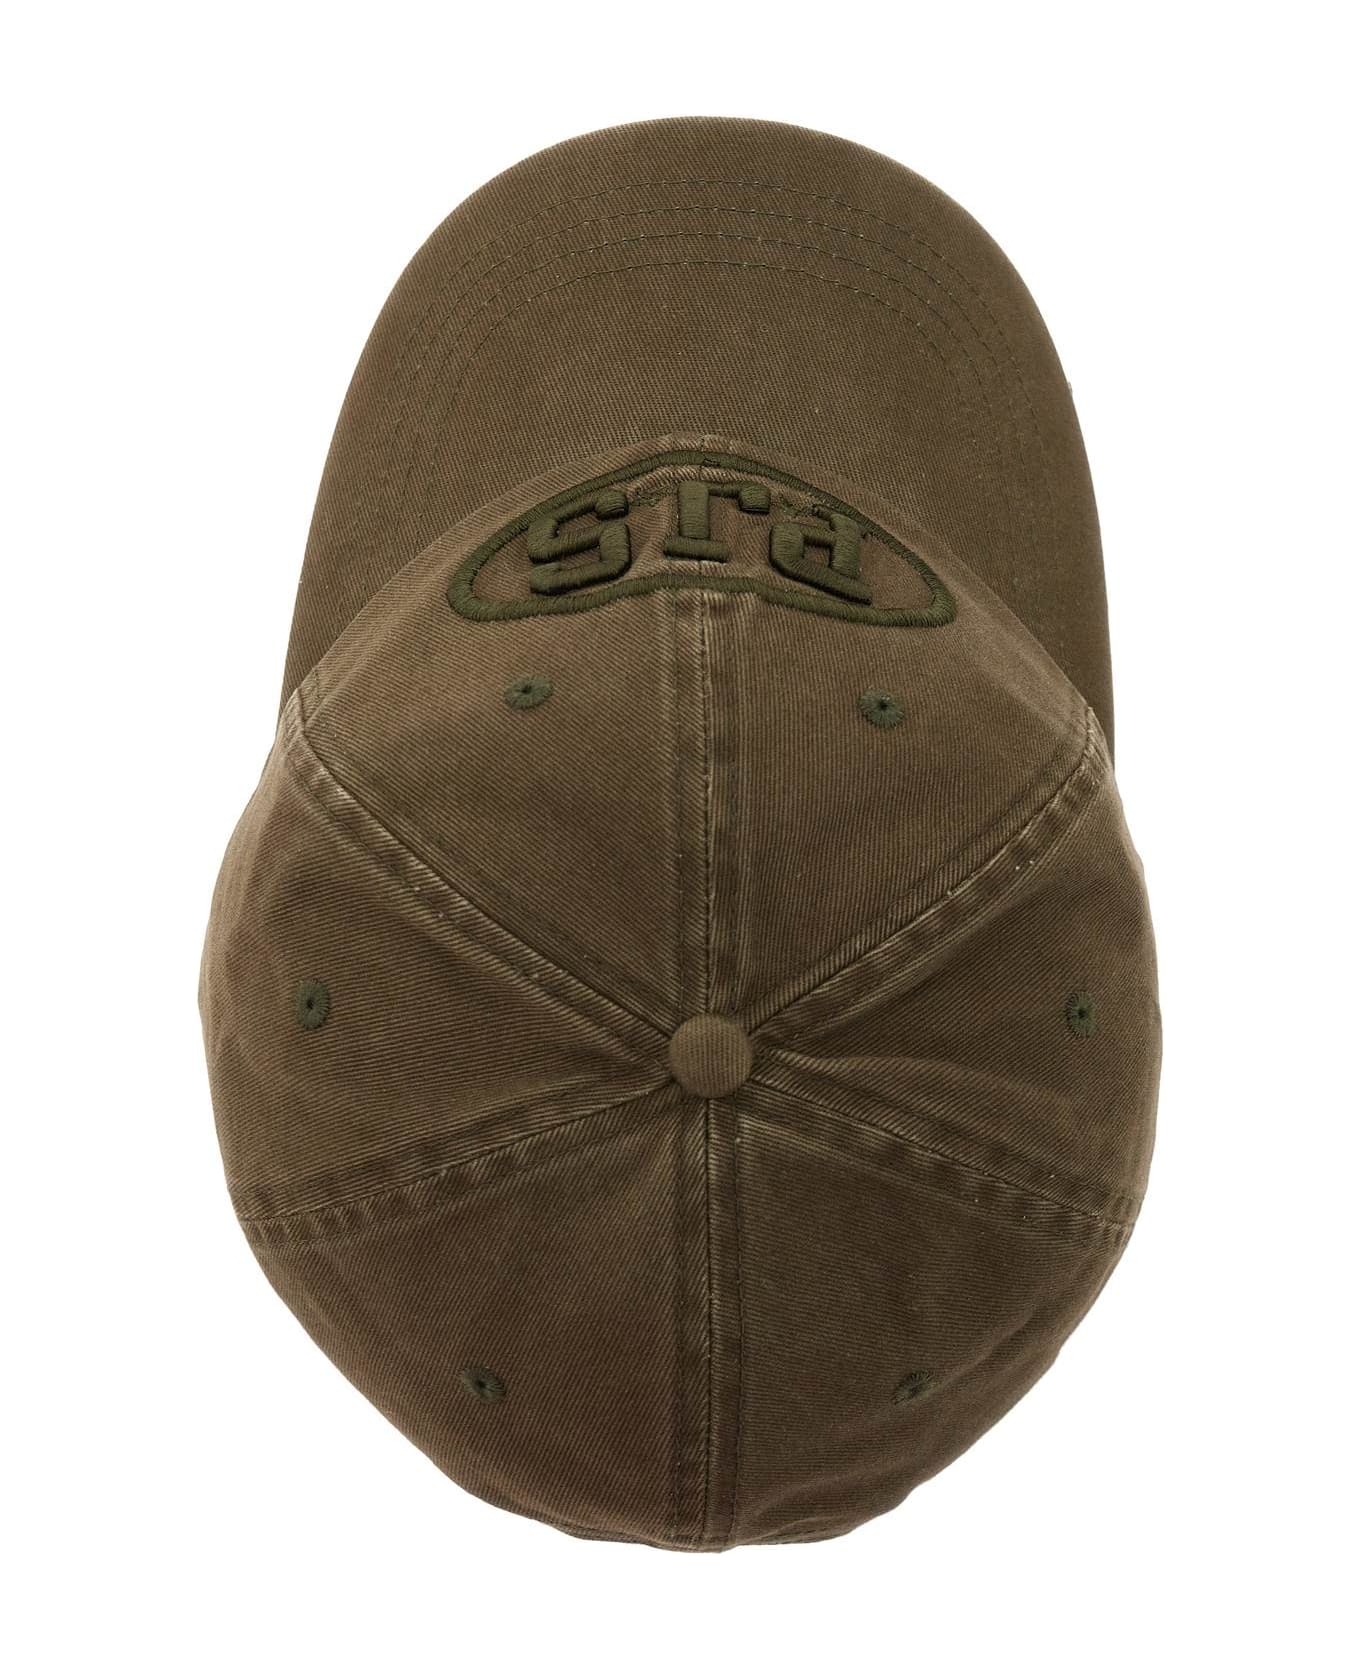 Parajumpers Baseball Cap With Embroidery - SURPLUS GREEN (Green) コート